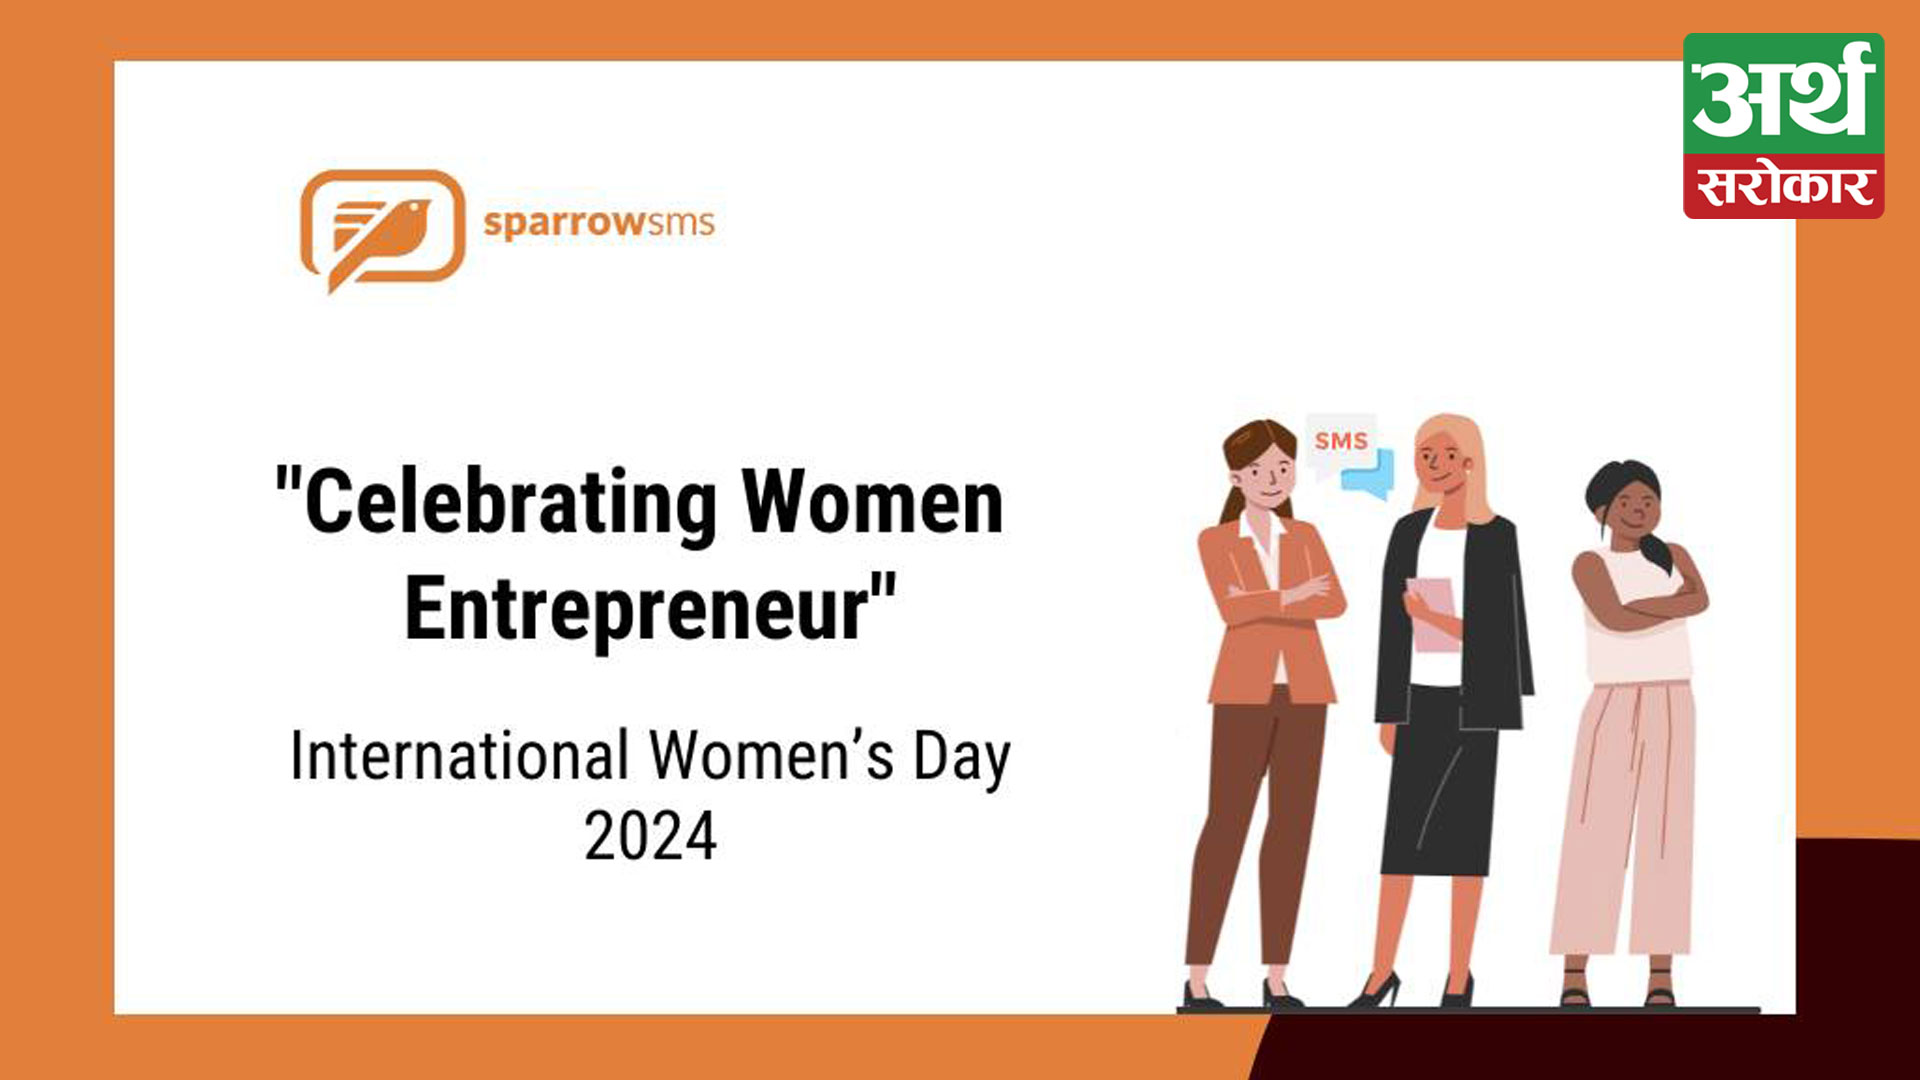 Sparrow SMS Launches ‘Celebrating Women Entrepreneur’ Campaign in honor of International Women’s Day